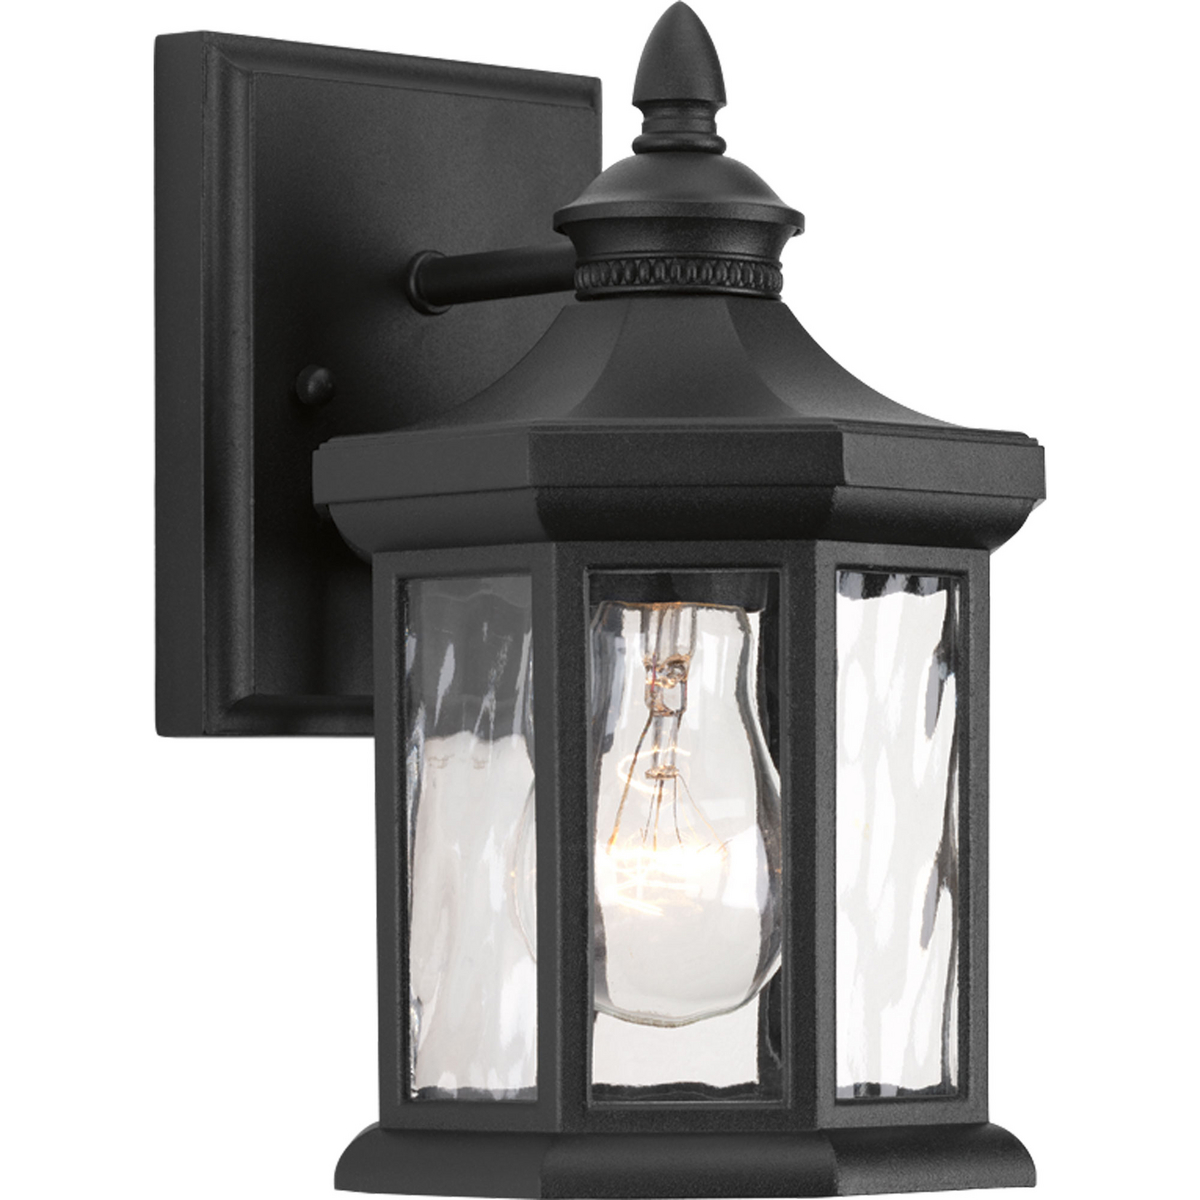 One-light small wall lantern with a distinct octagonal shape for classic styling, highlighted by clear water glass elements.